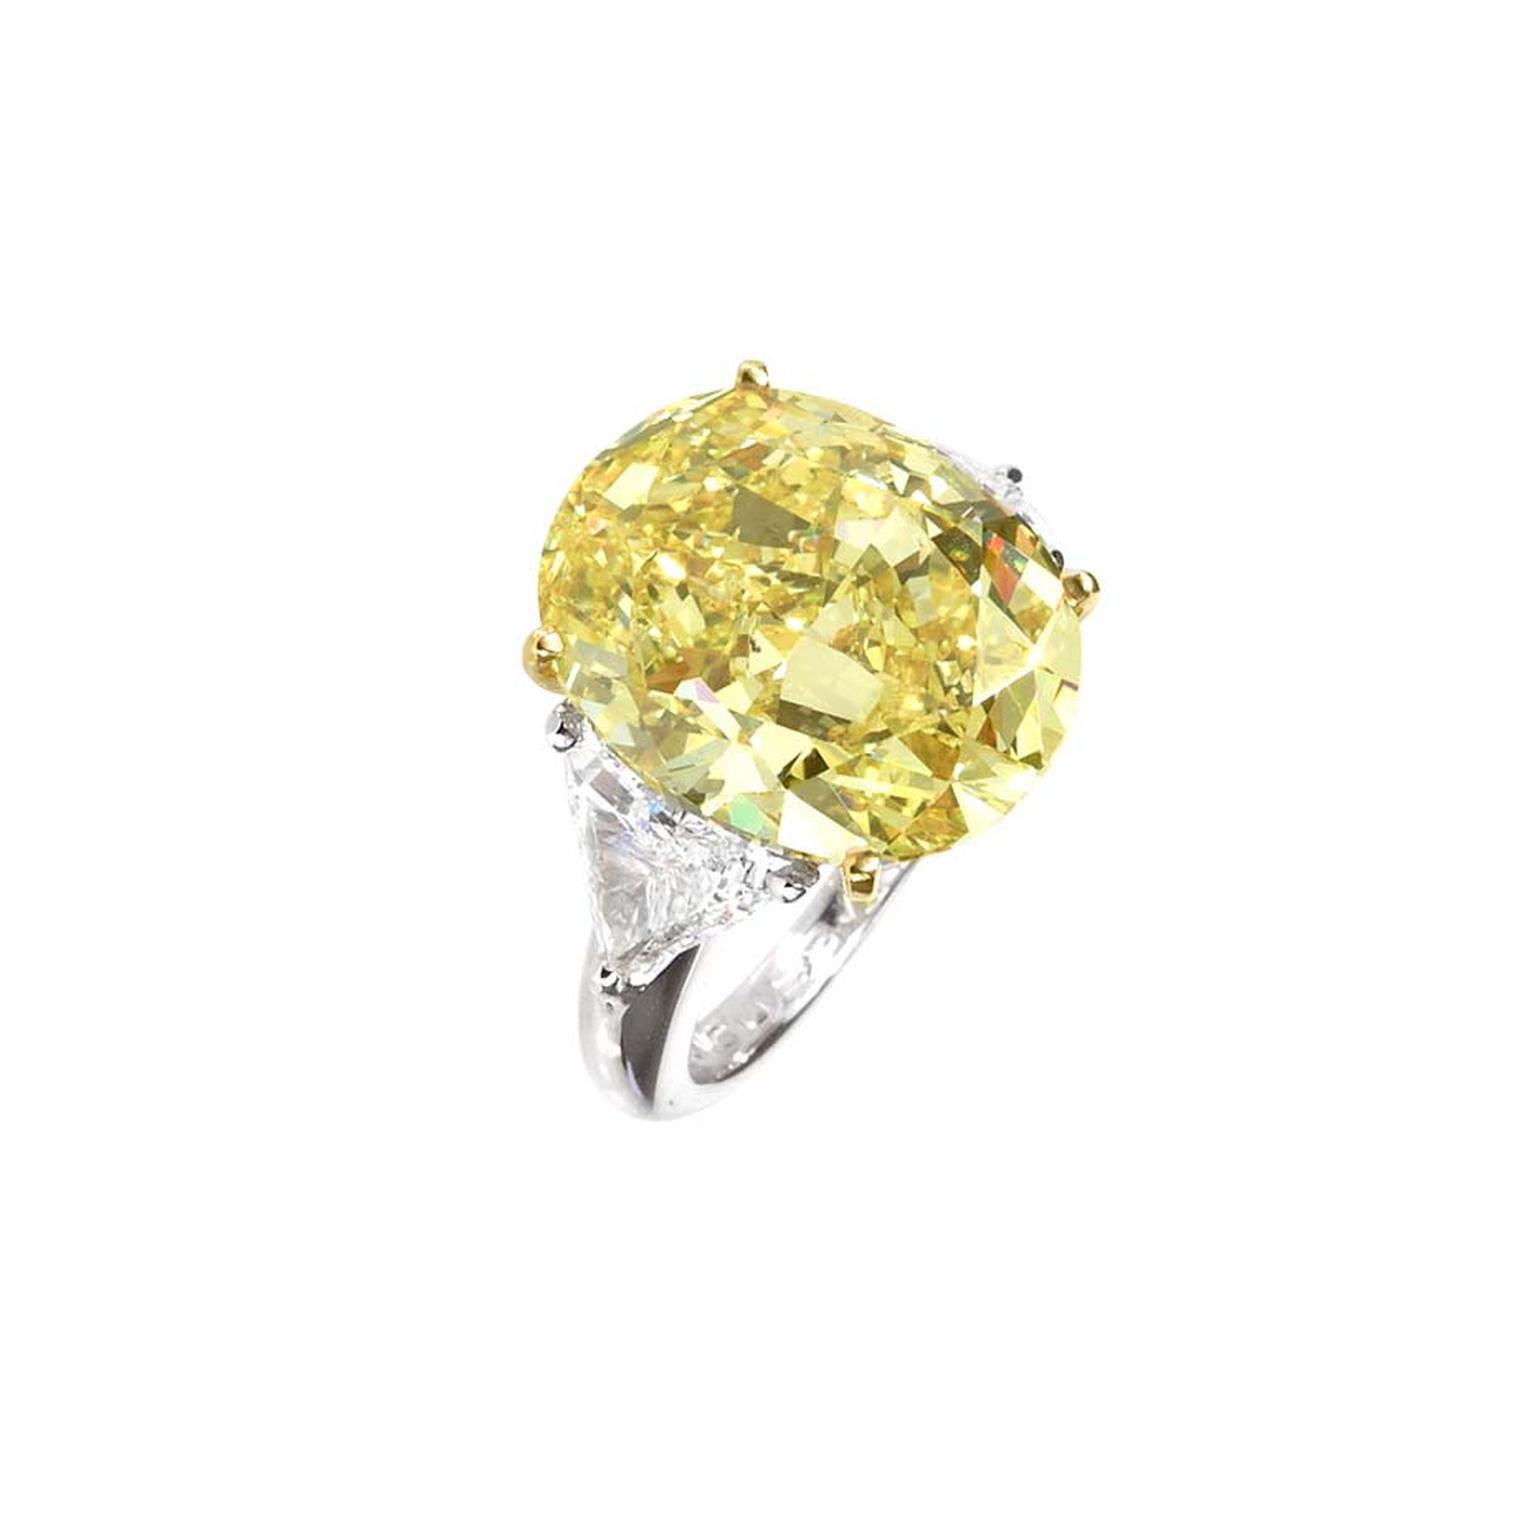 Big engagement ring_Moussaieff_Oval Yellow diamond ring.jpg